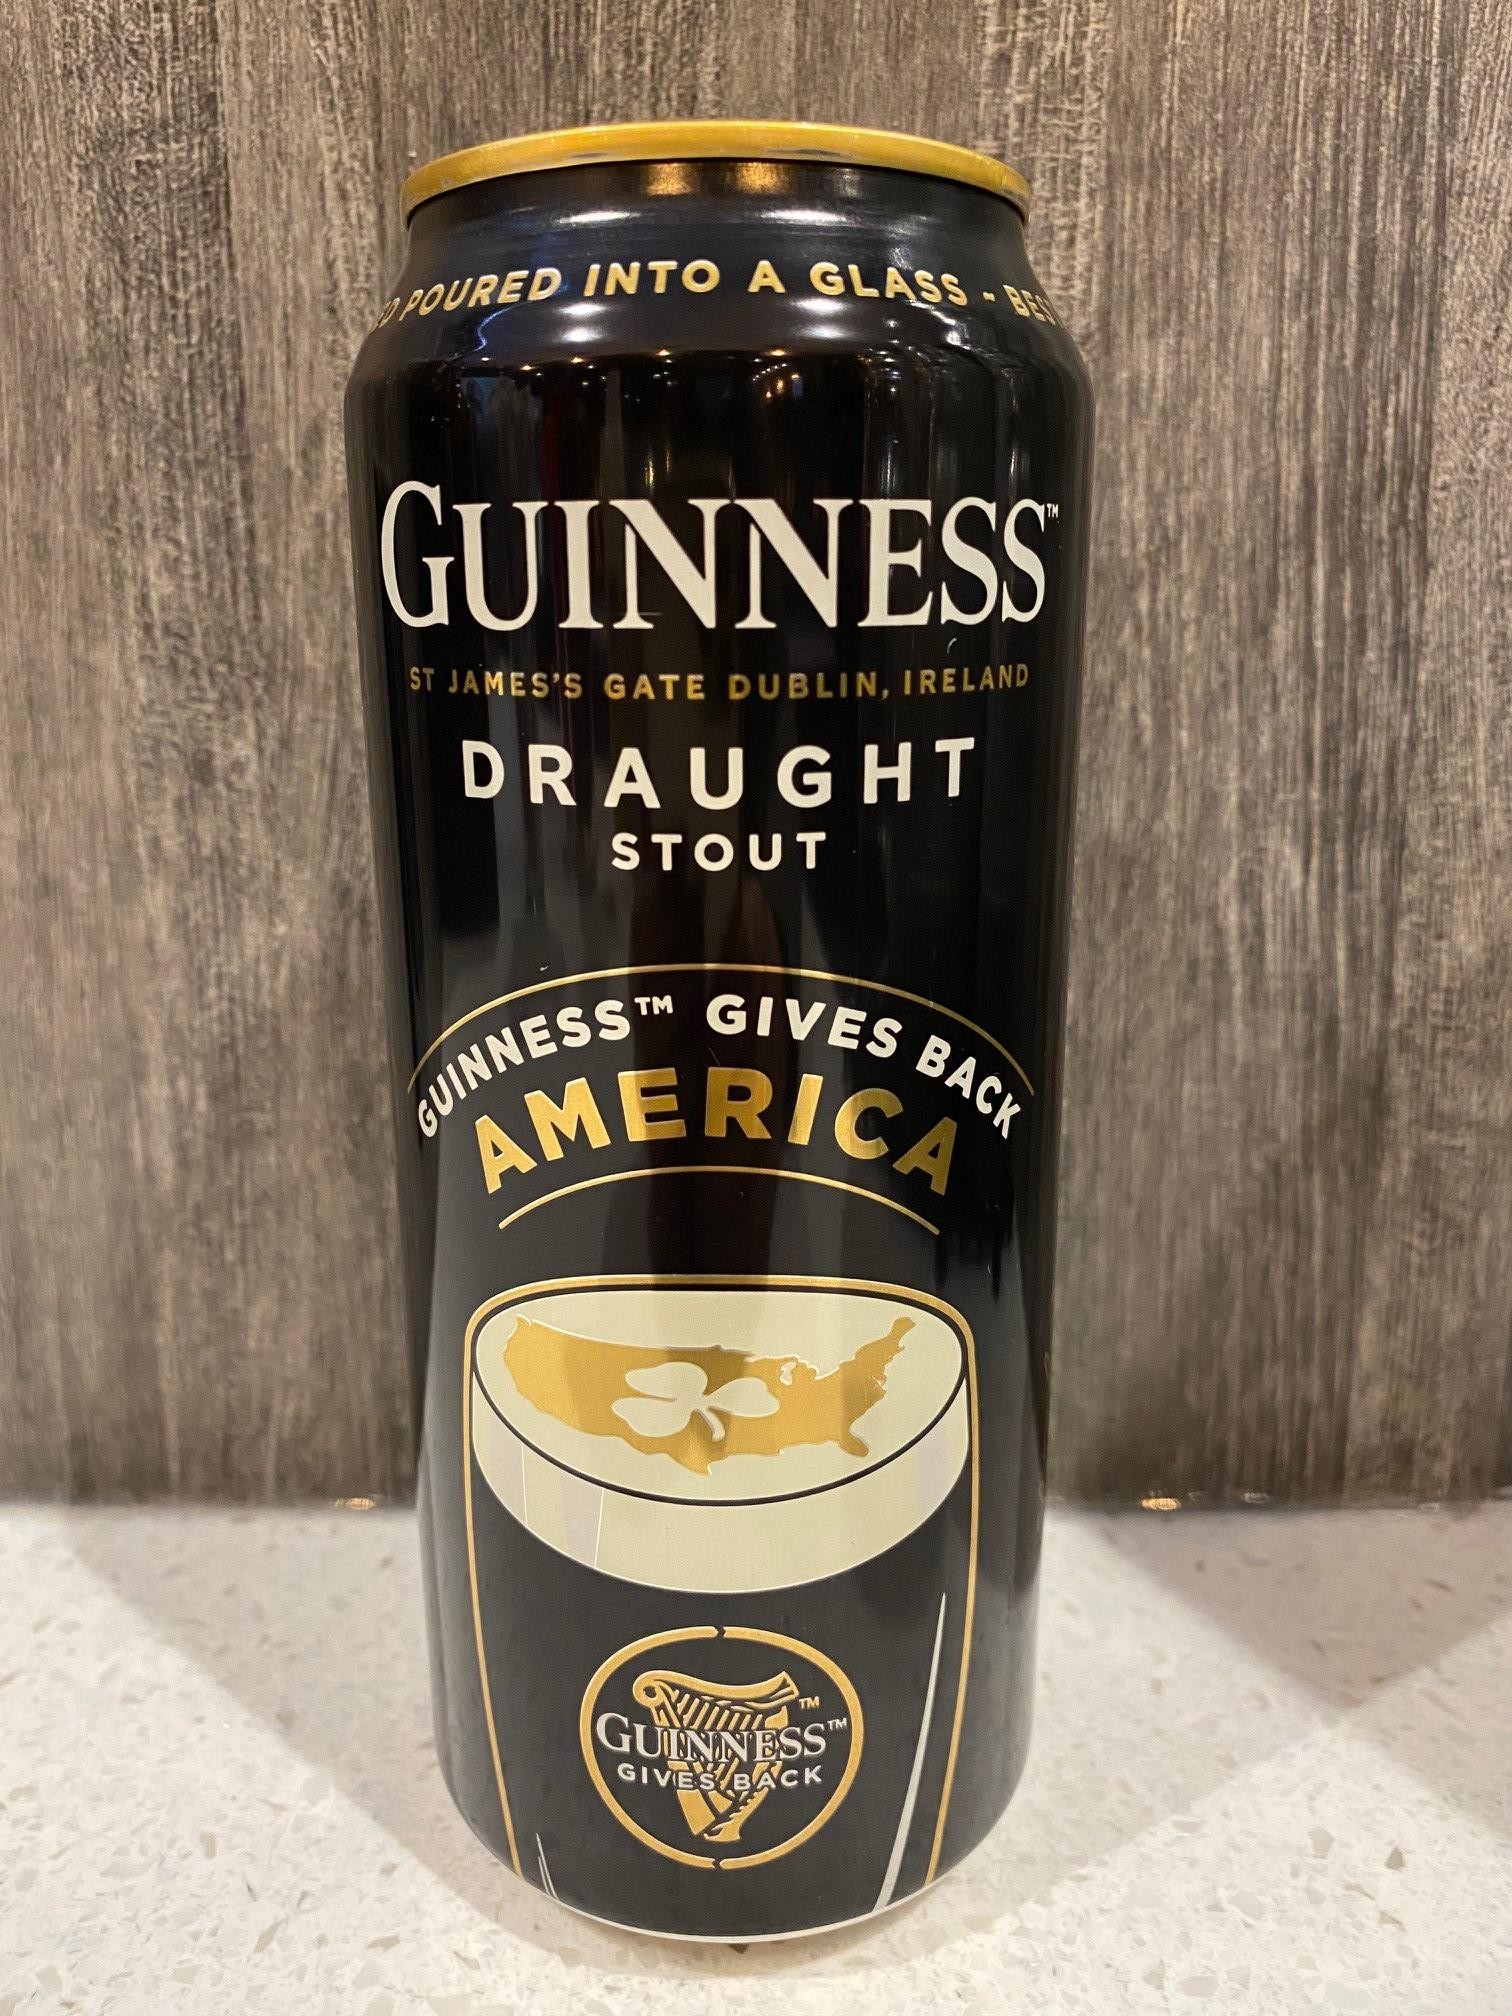 Guinness Stout Draught